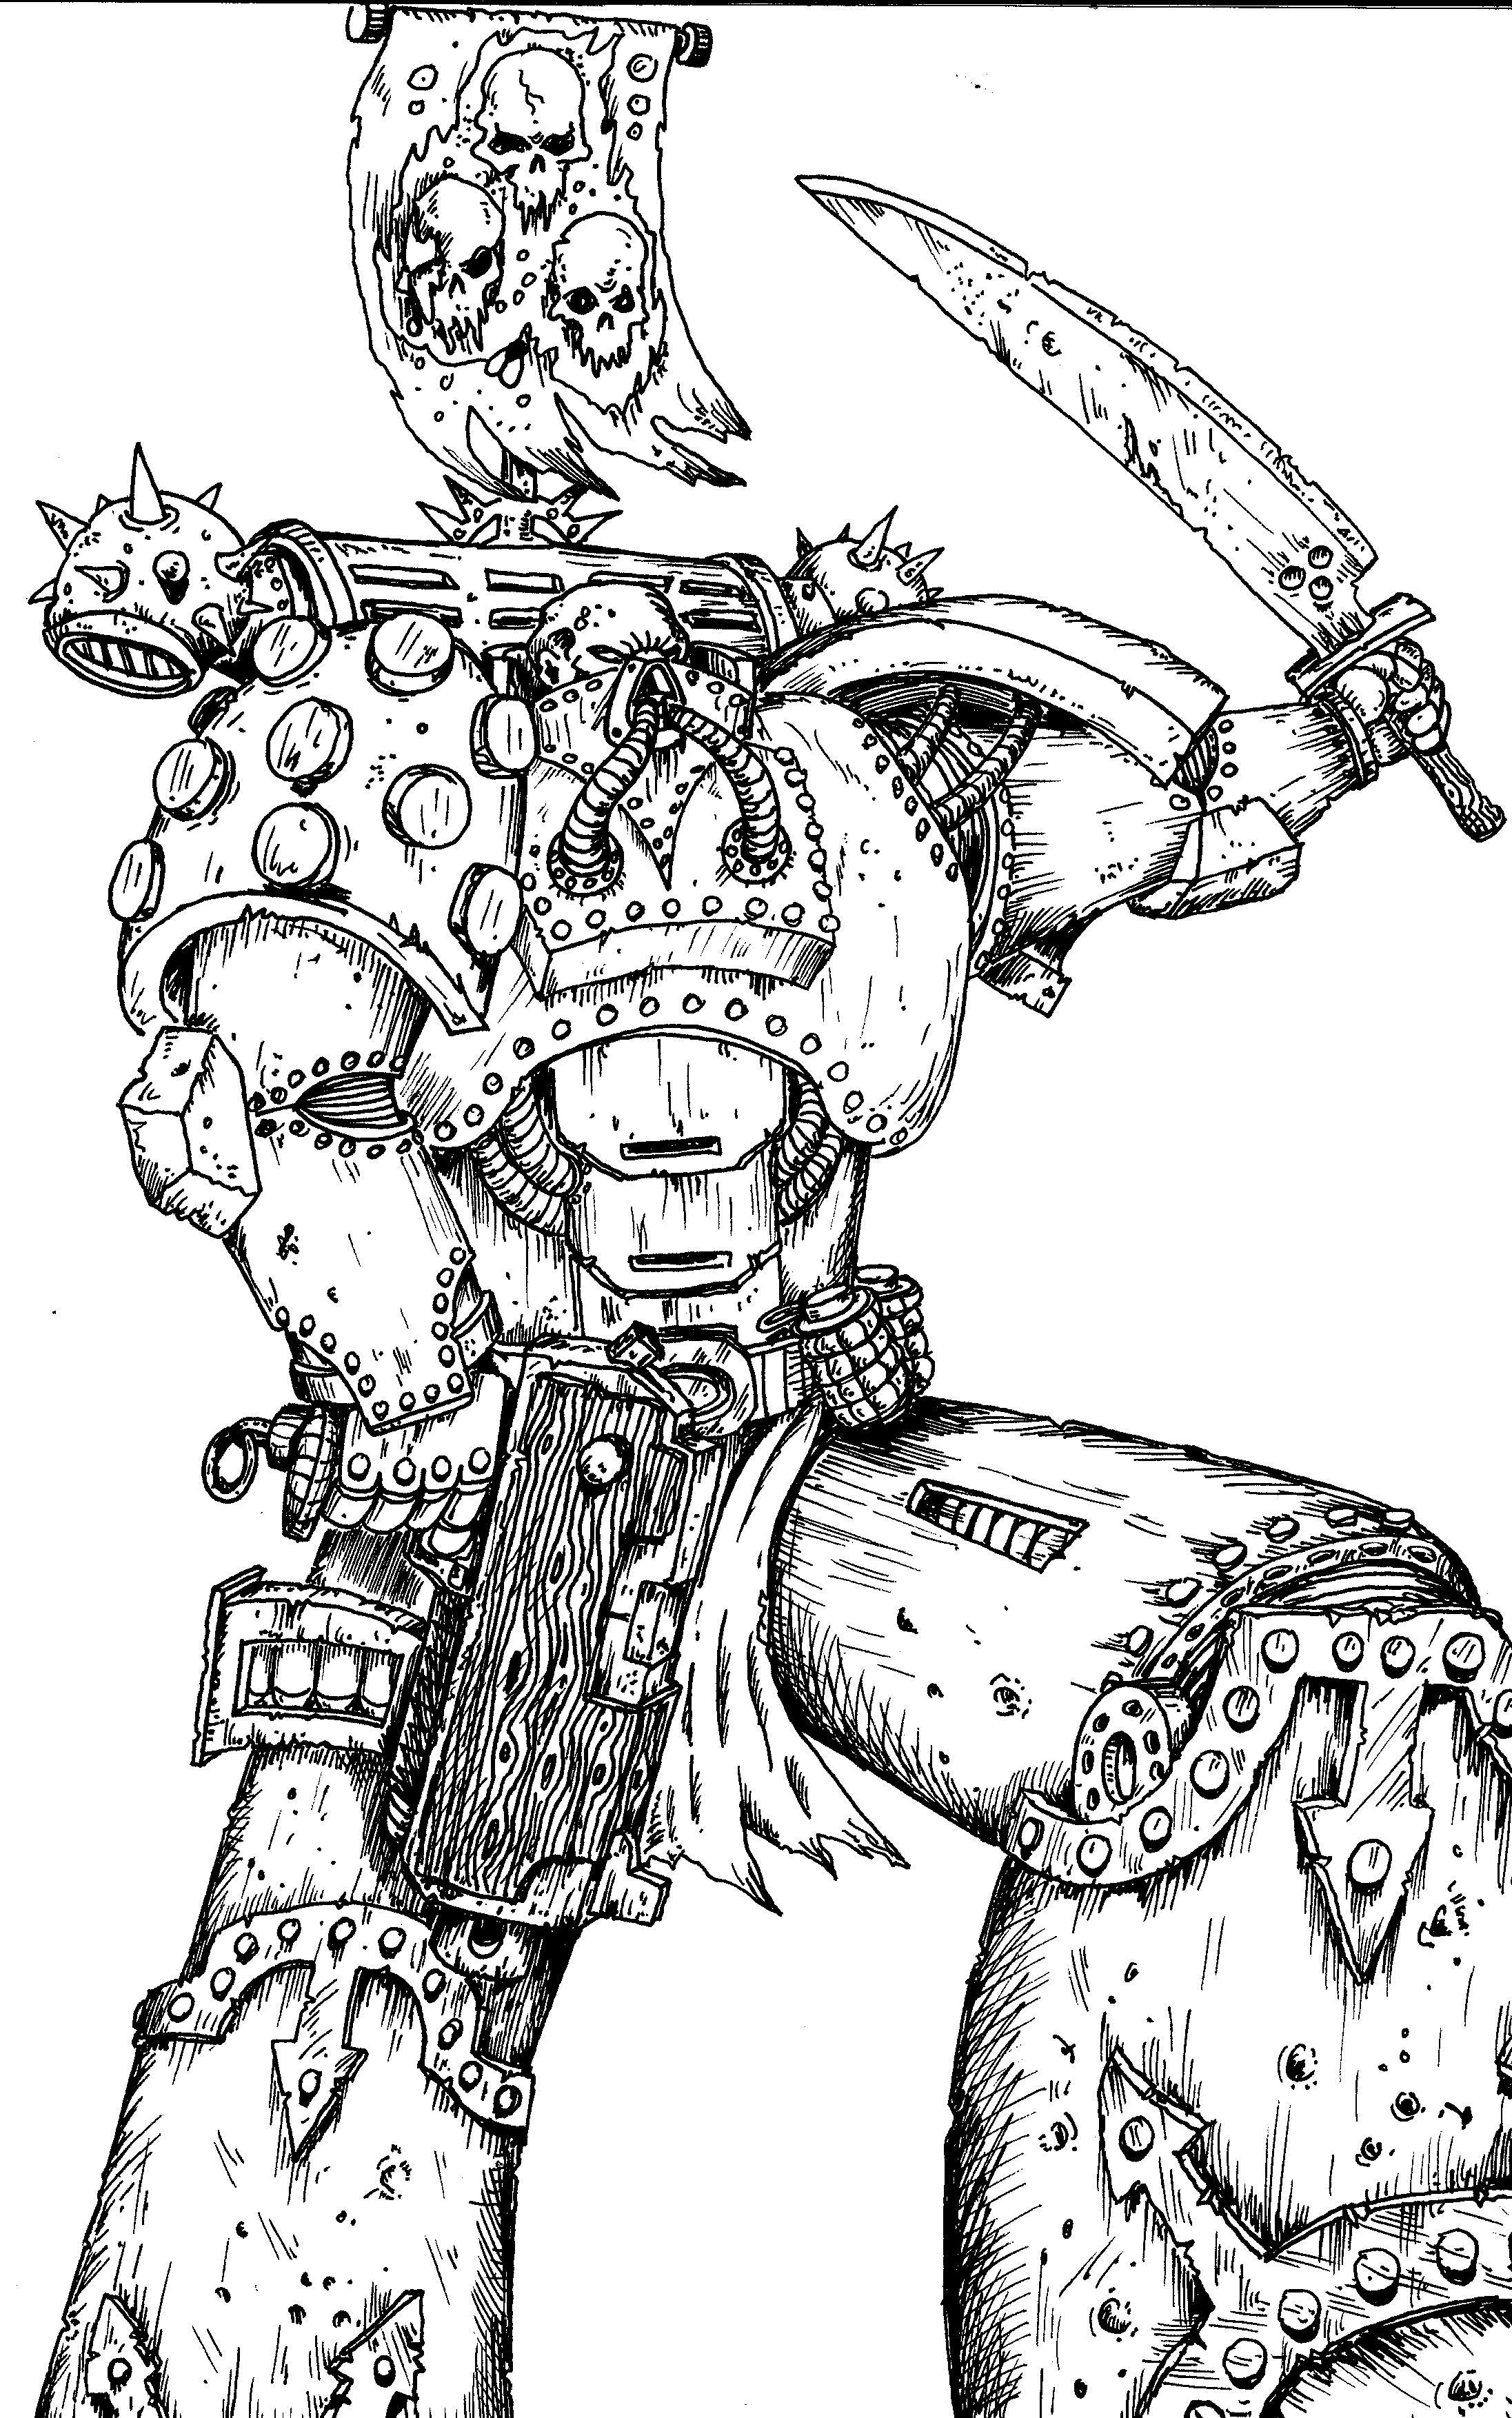 Artwork, Chaos, Chaos Space Marines, Drawing, Gk, Great, Guo, Librarian, Nurgle, Old, School, Space Marines, Style, Unclean